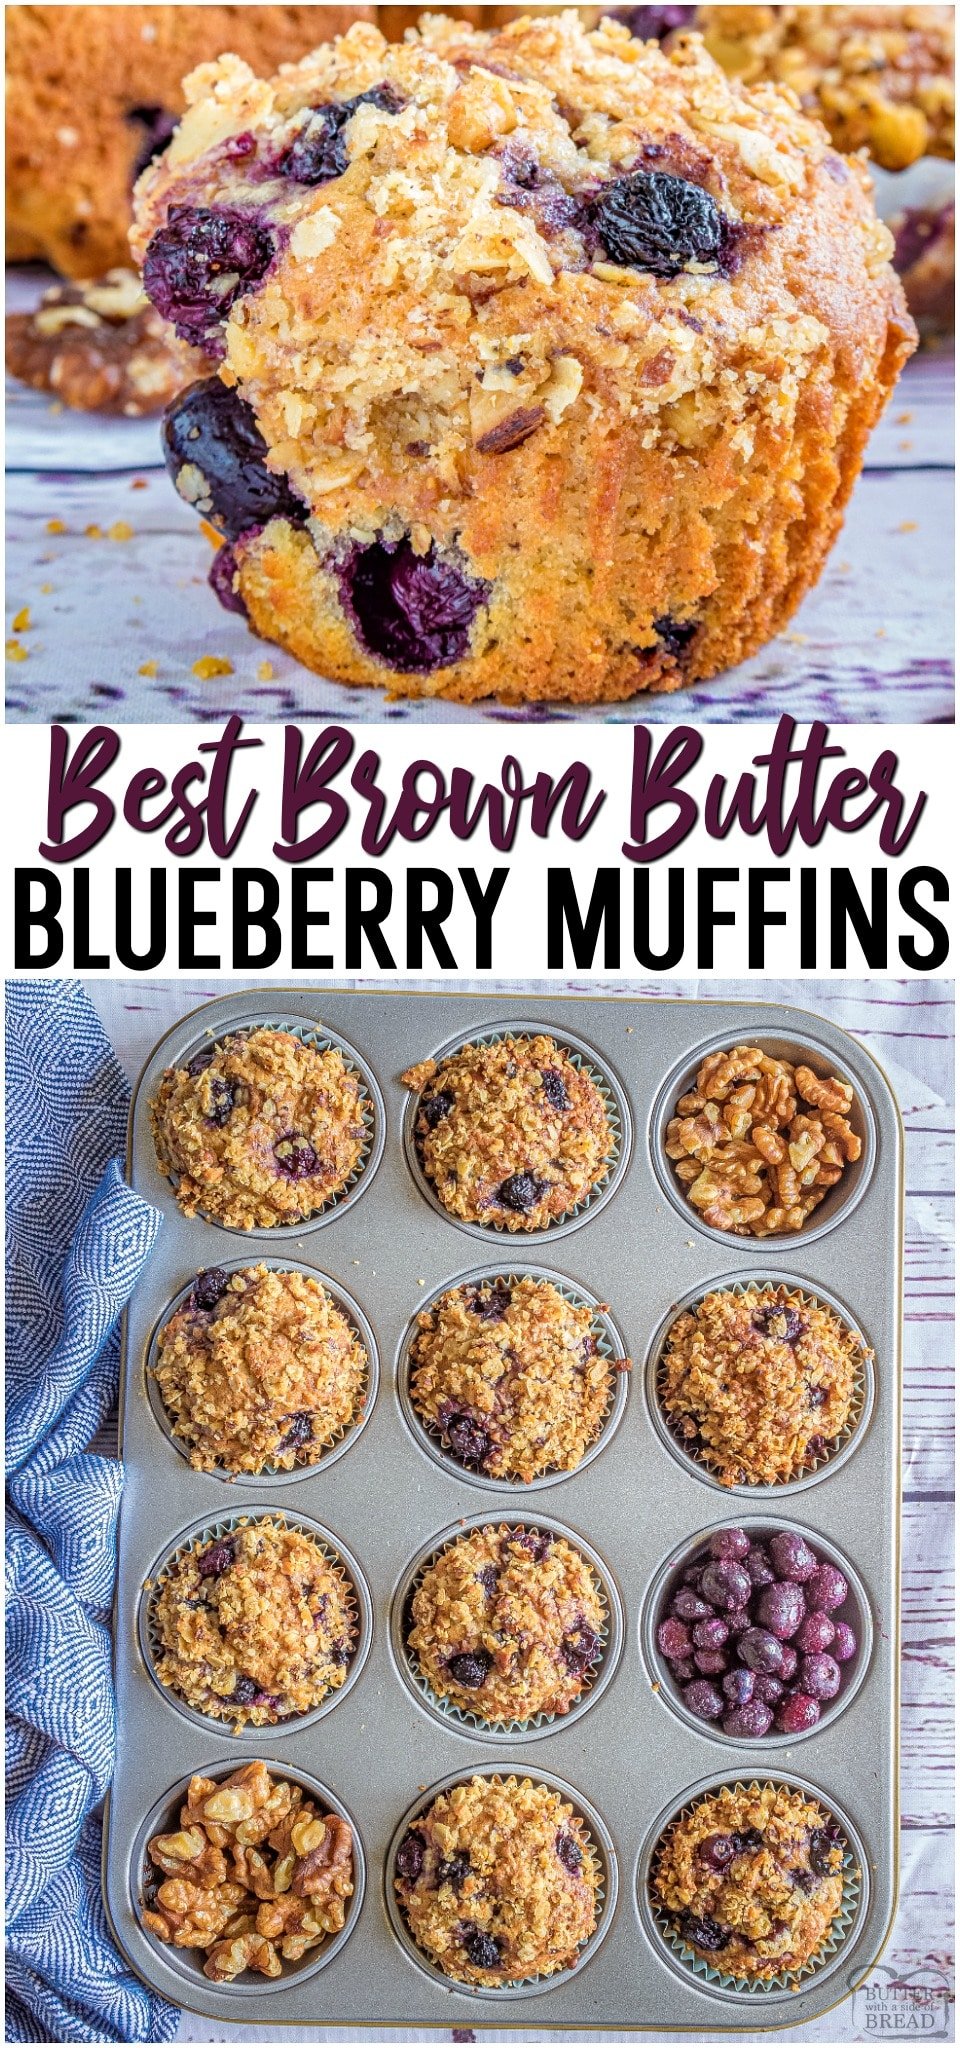 Brown butter blueberry muffins are soft, flavorful muffins topped with a buttery streusel. Homemade Blueberry Muffin recipe that yields soft muffins, bursting with blueberry flavor.